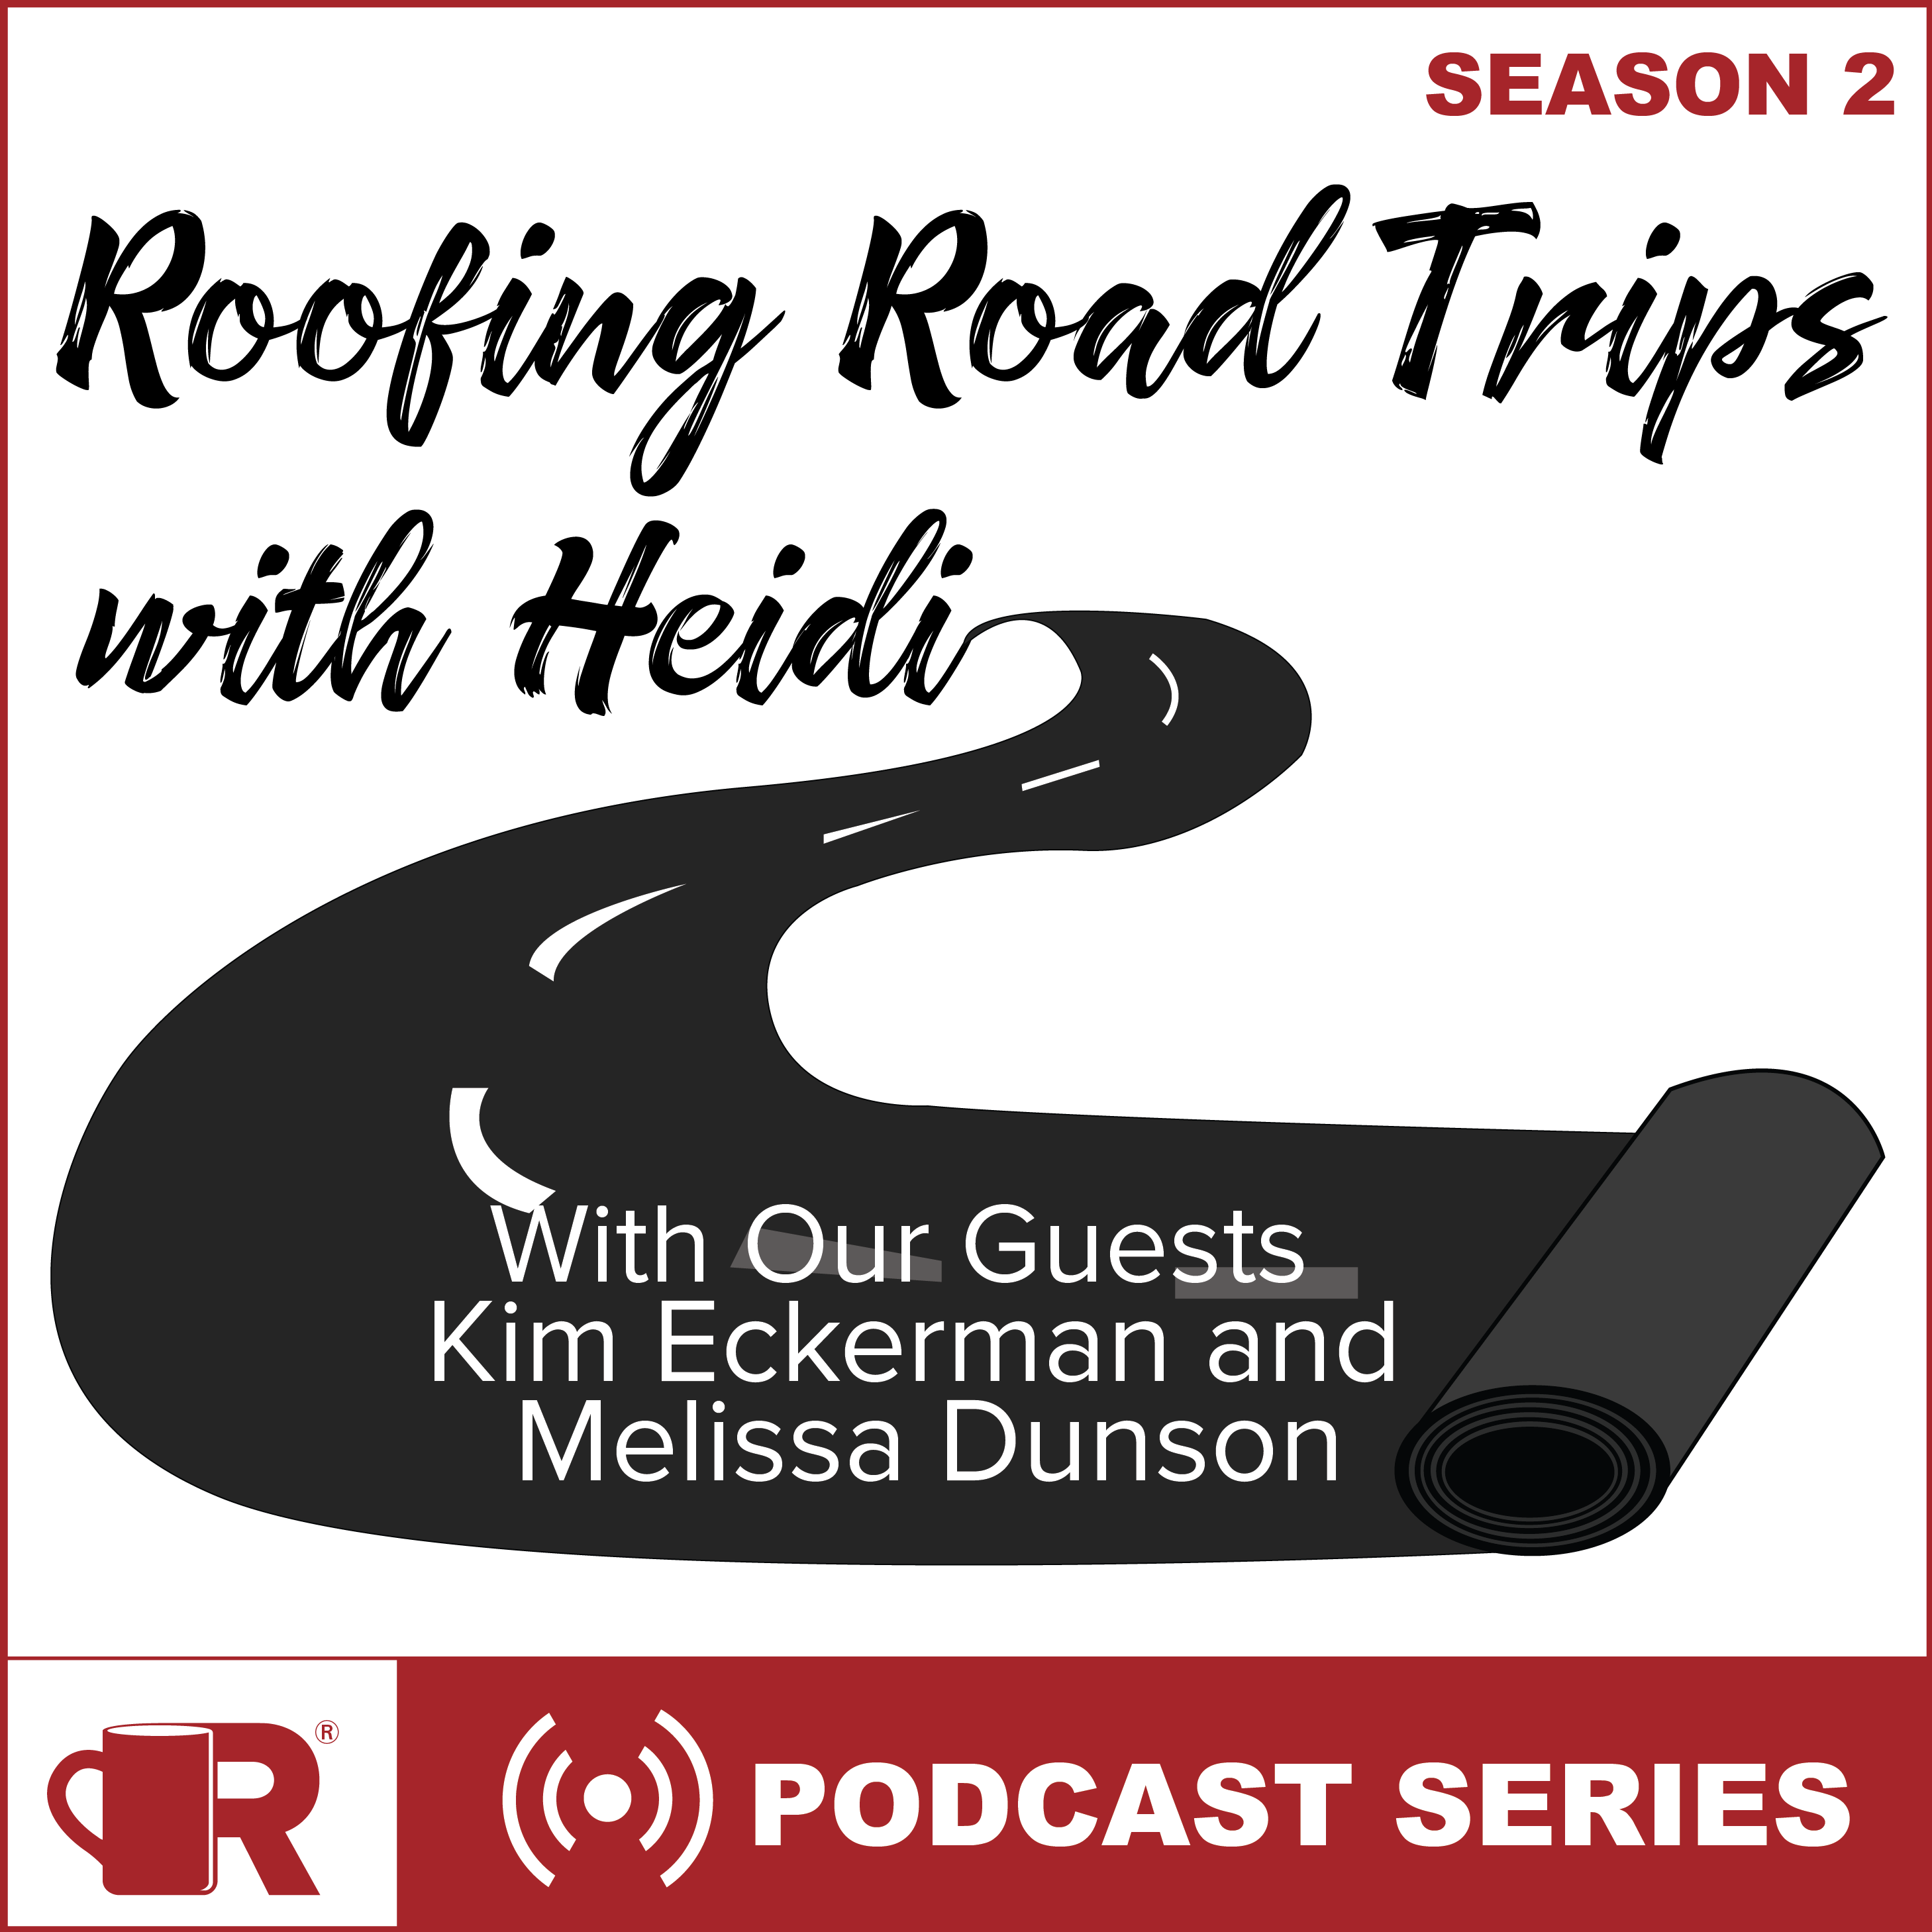 Roofing Road Trips with Heidi with Special Guests Kim Eckerman and Melissa Dunson